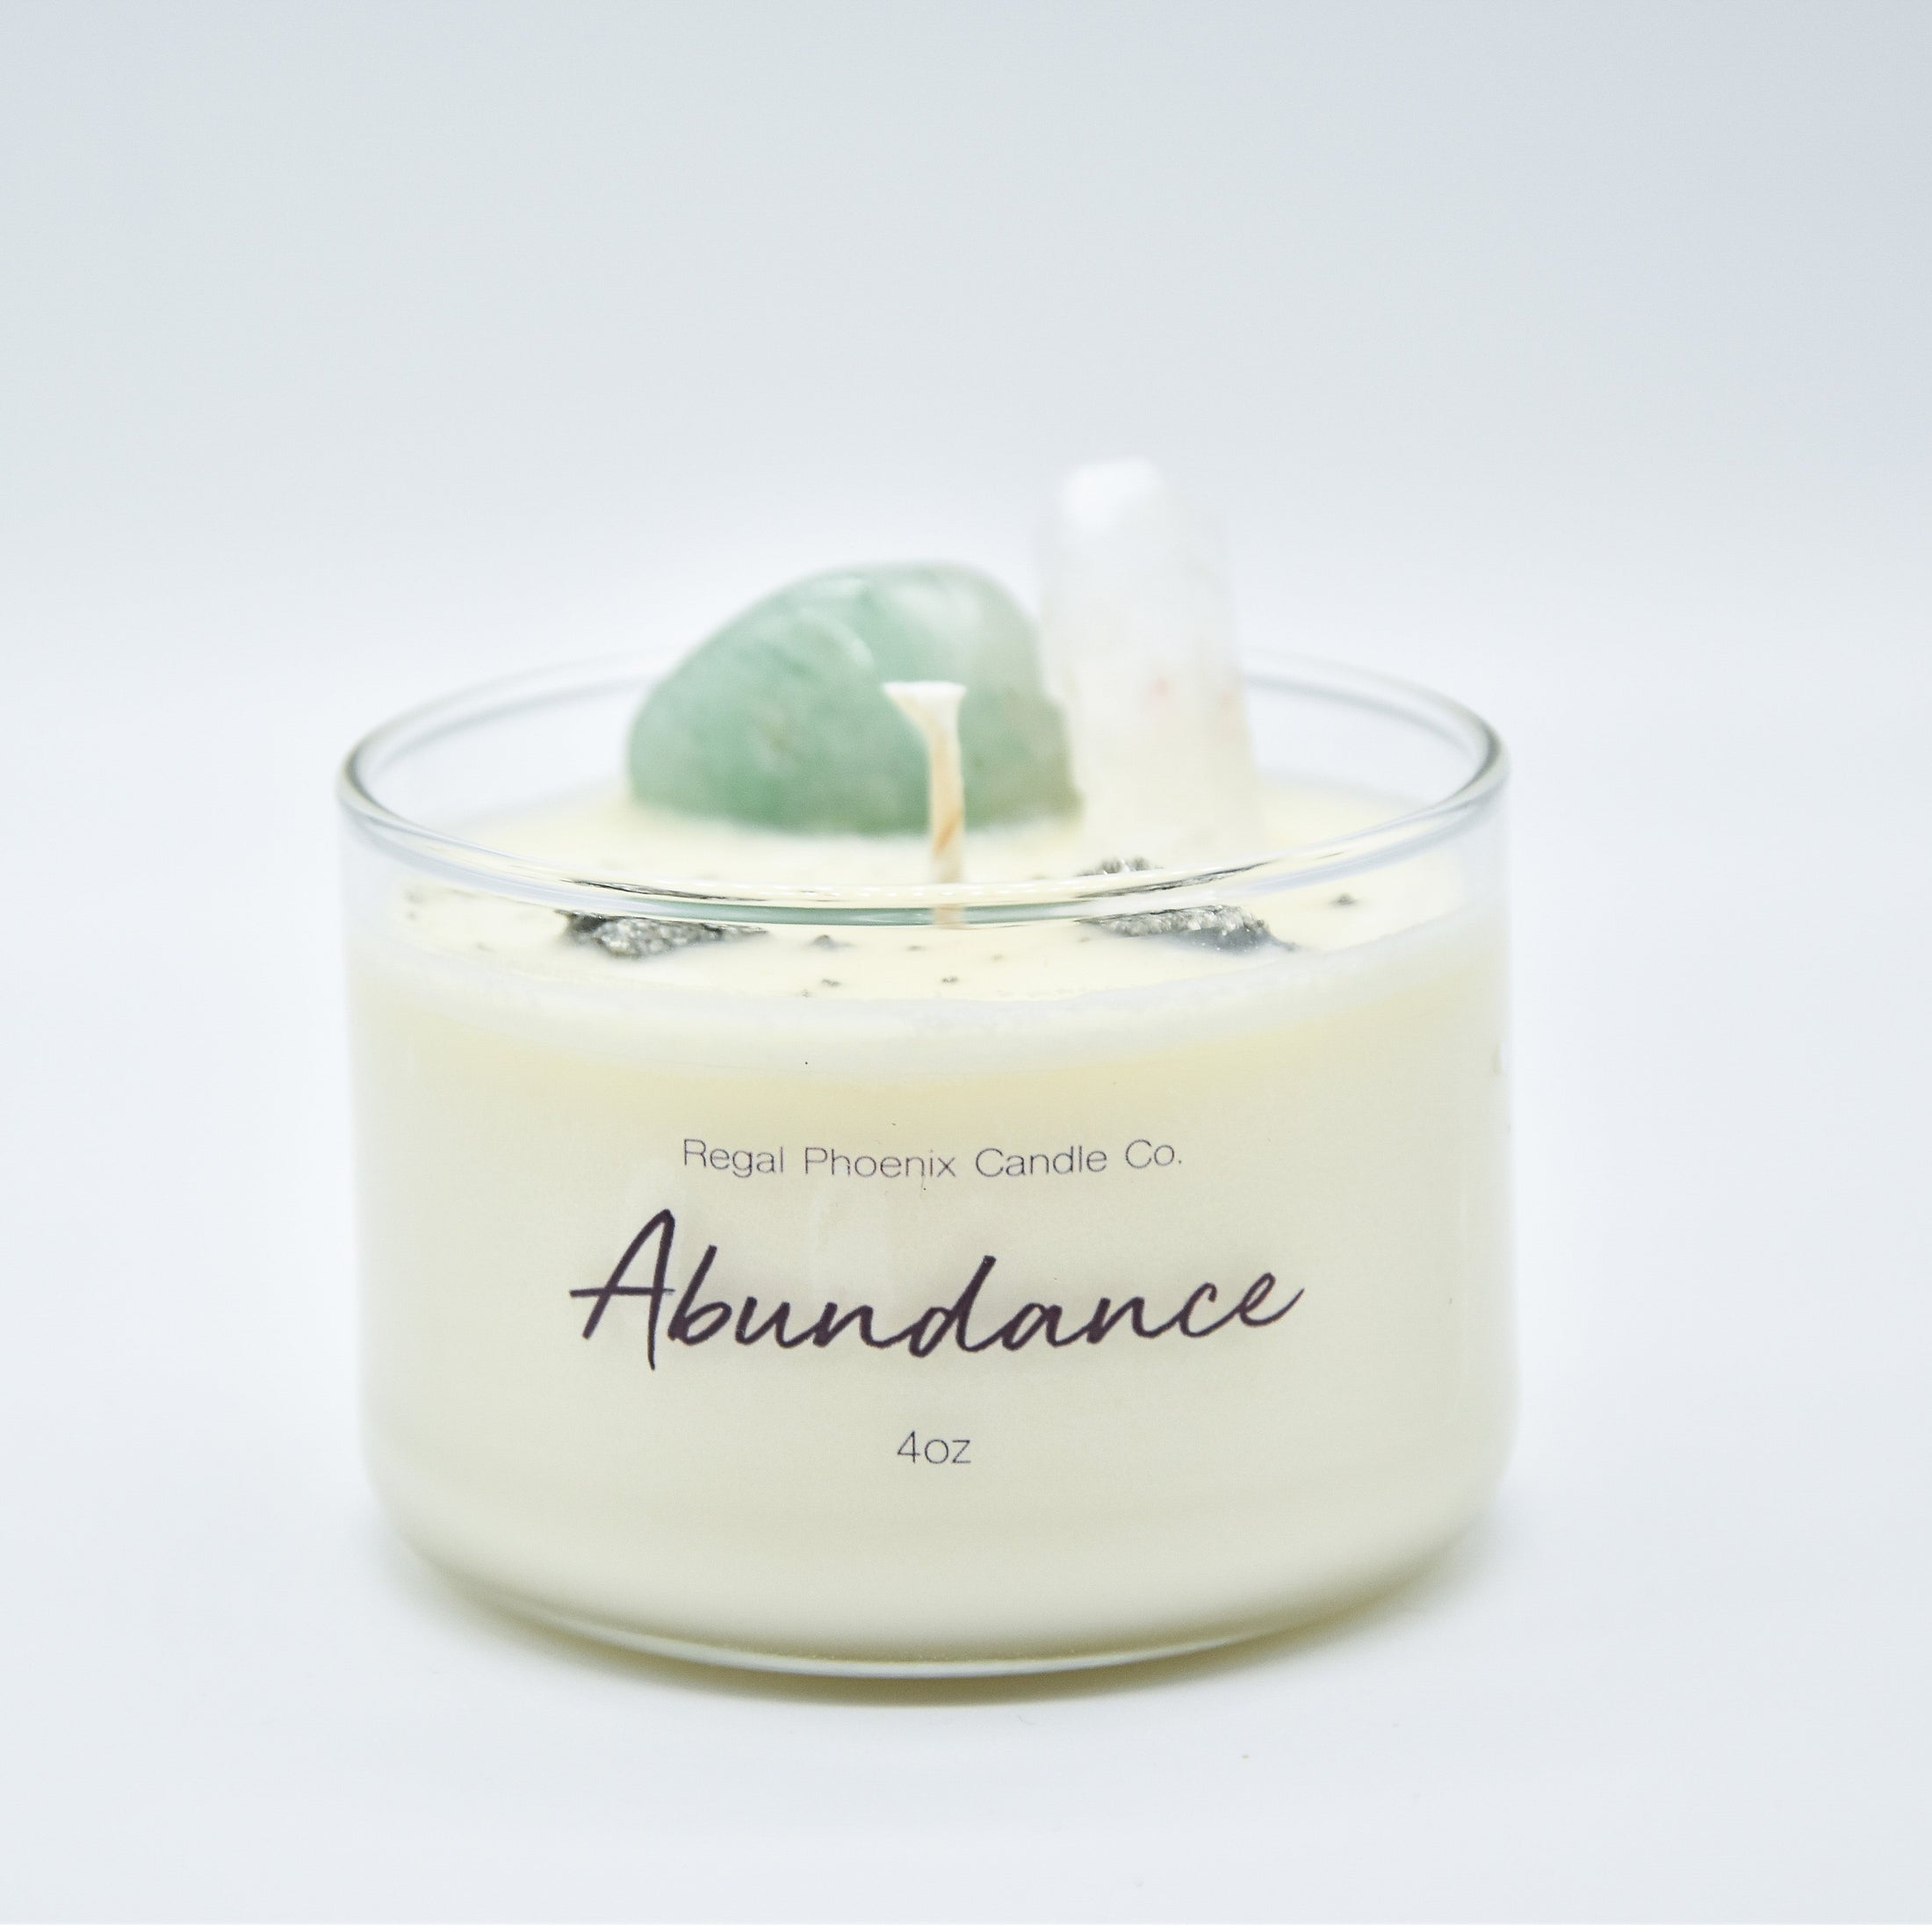 "ManifestHer" Crystal Infused Soy Candle